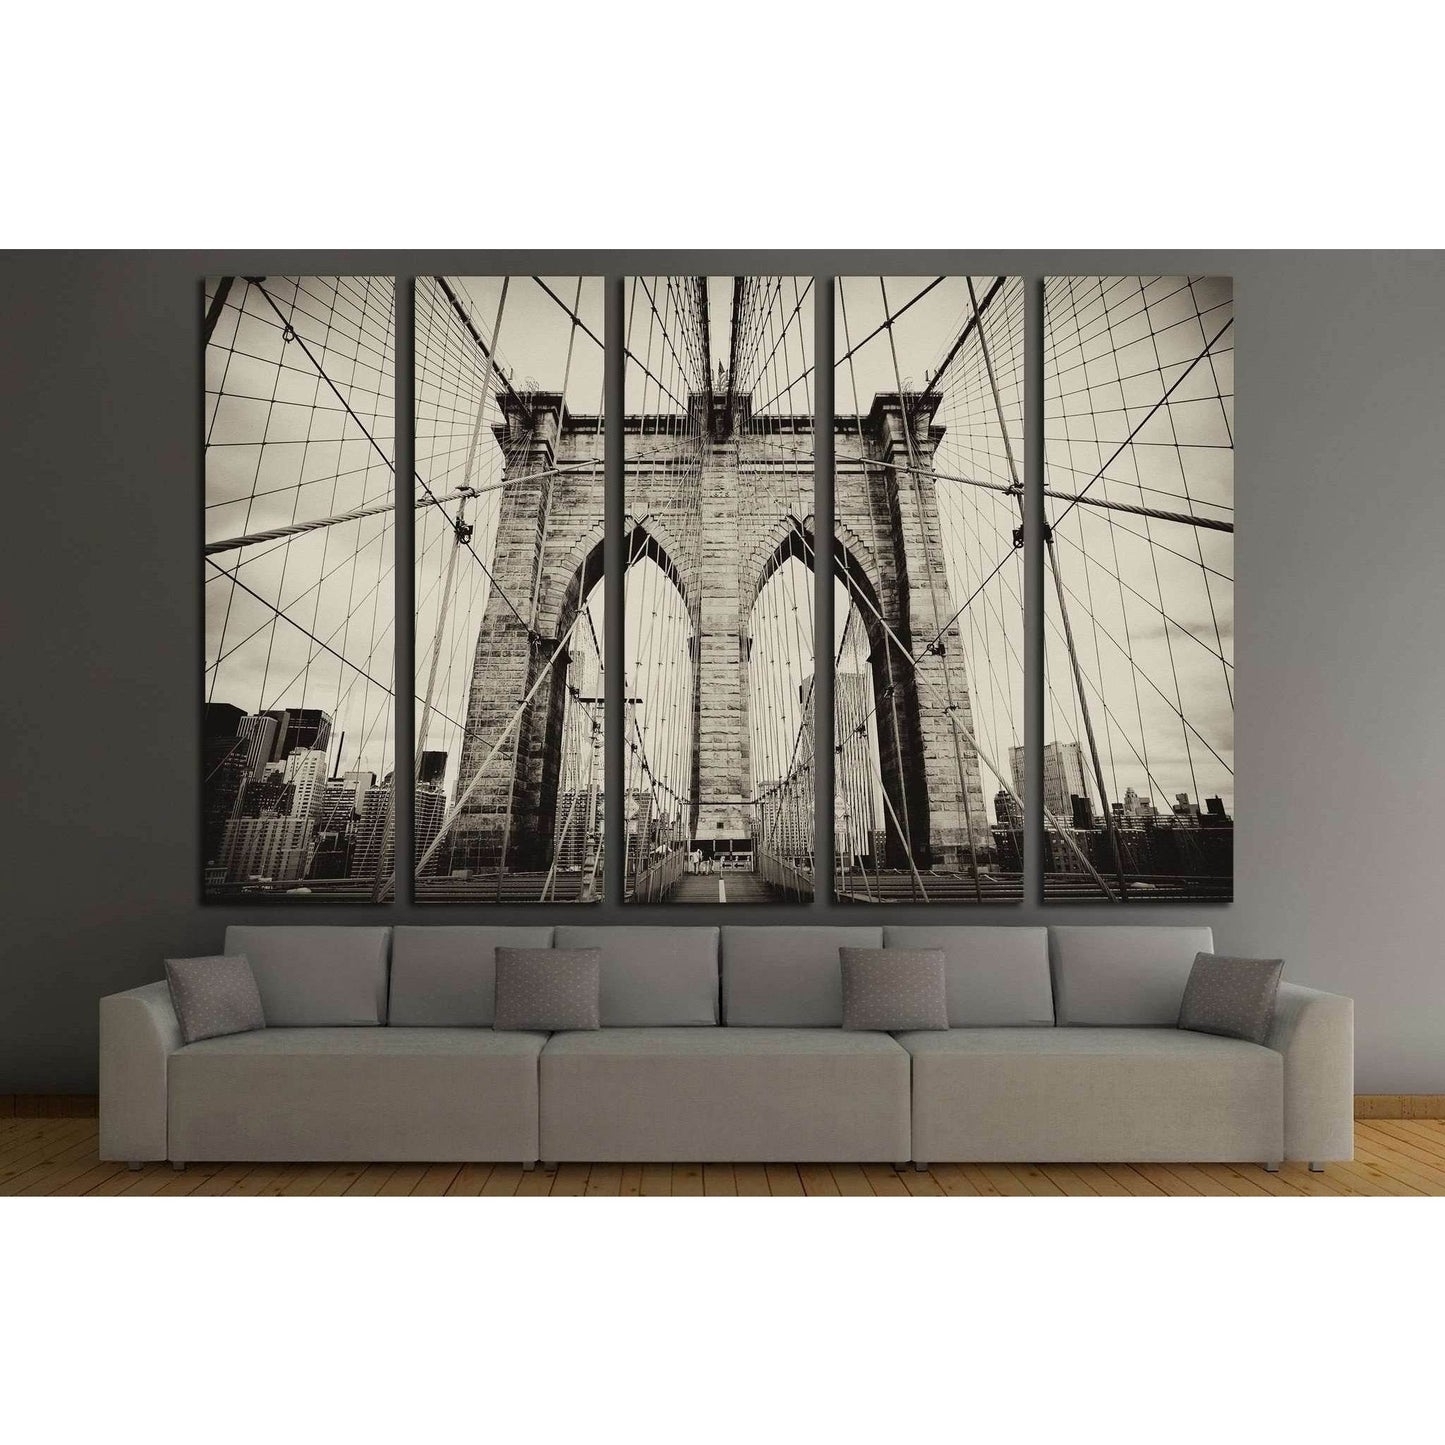 Brooklyn Bridge Wall Art PrintDecorate your walls with a stunning Brooklyn Bridge Canvas Art Print from the world's largest art gallery. Choose from thousands of Brooklyn Bridge artworks with various sizing options. Choose your perfect art print to comple